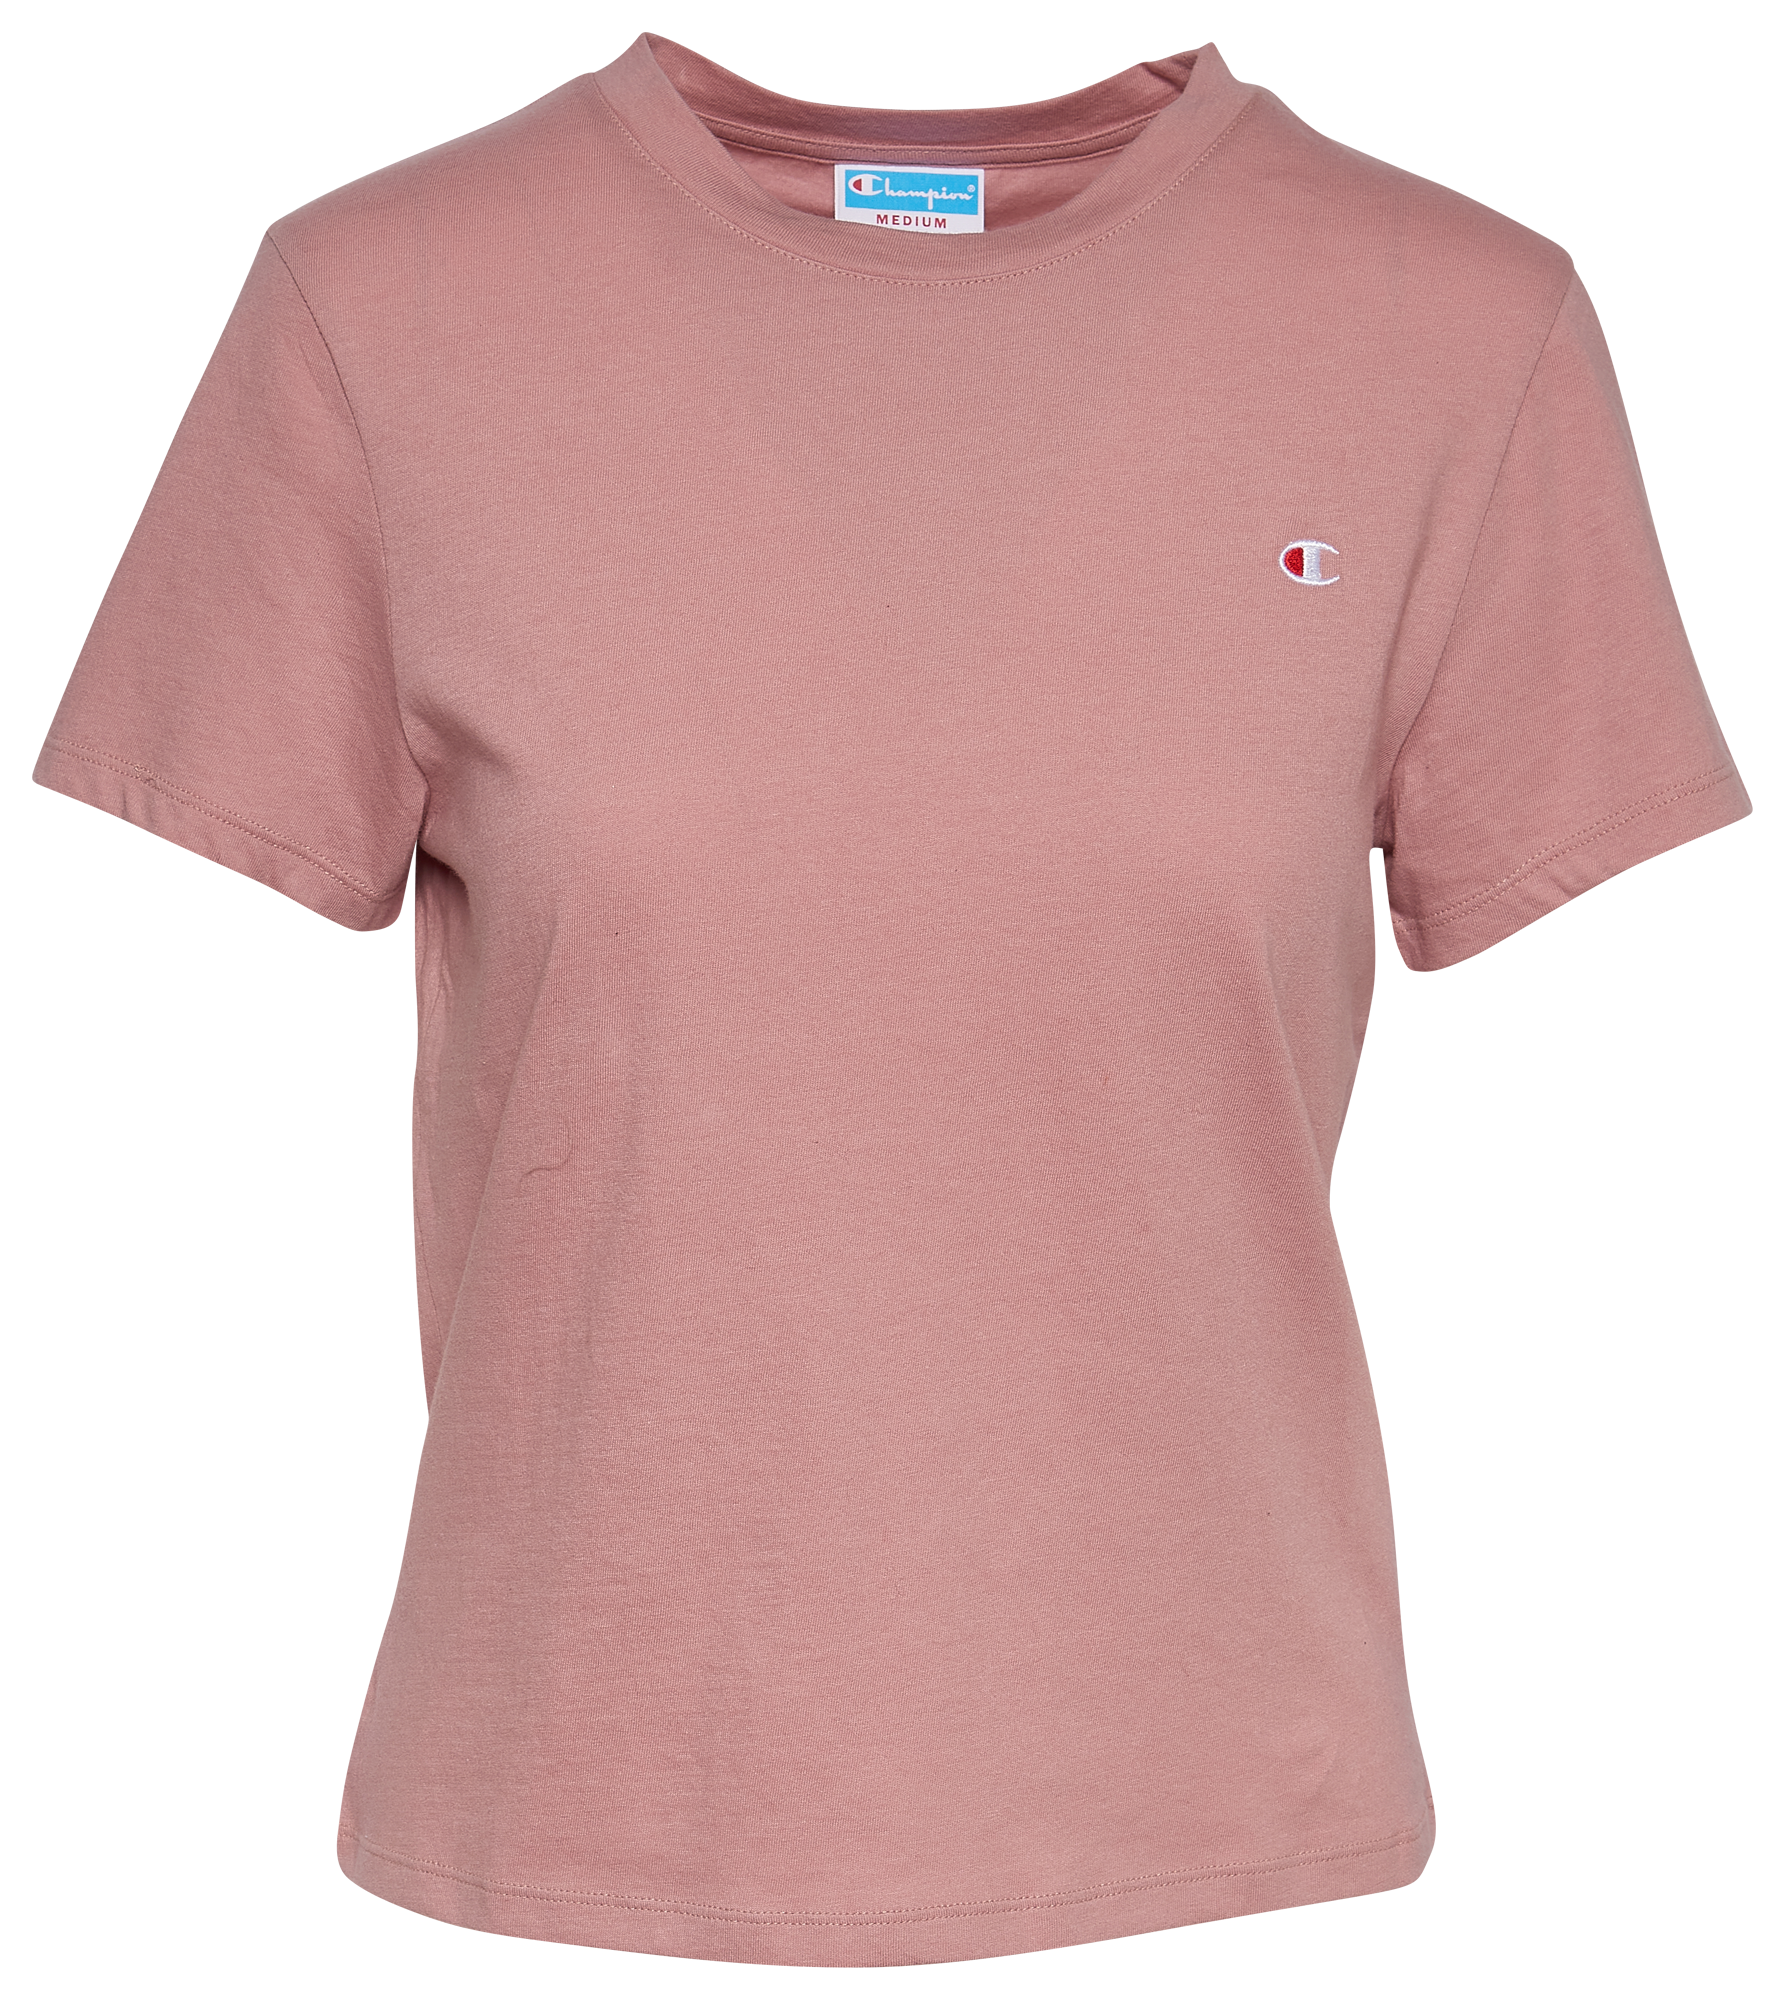 Champion Lightweight Fitted Tee - Women's